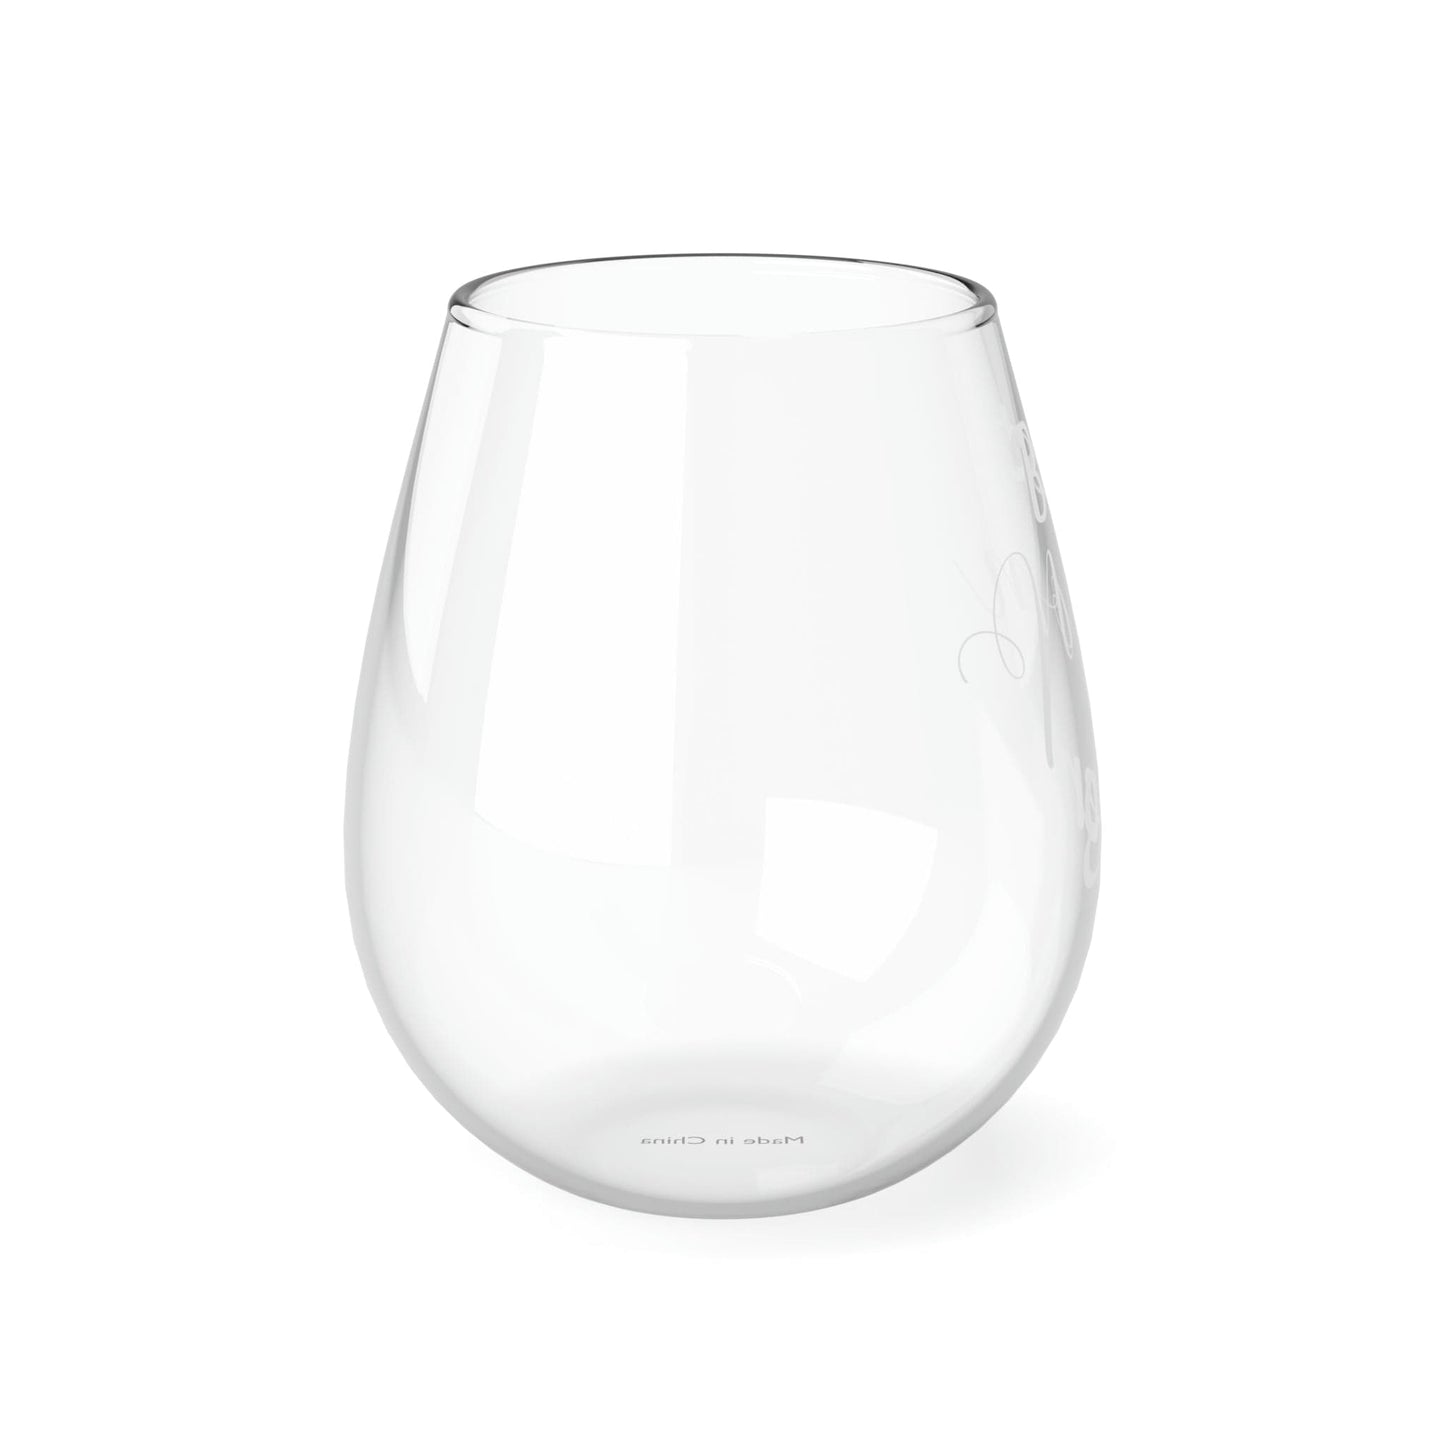 Gift For Mom | Stemless Wine Glass, Mothers Day, Birthday, Anniversary, Personalized